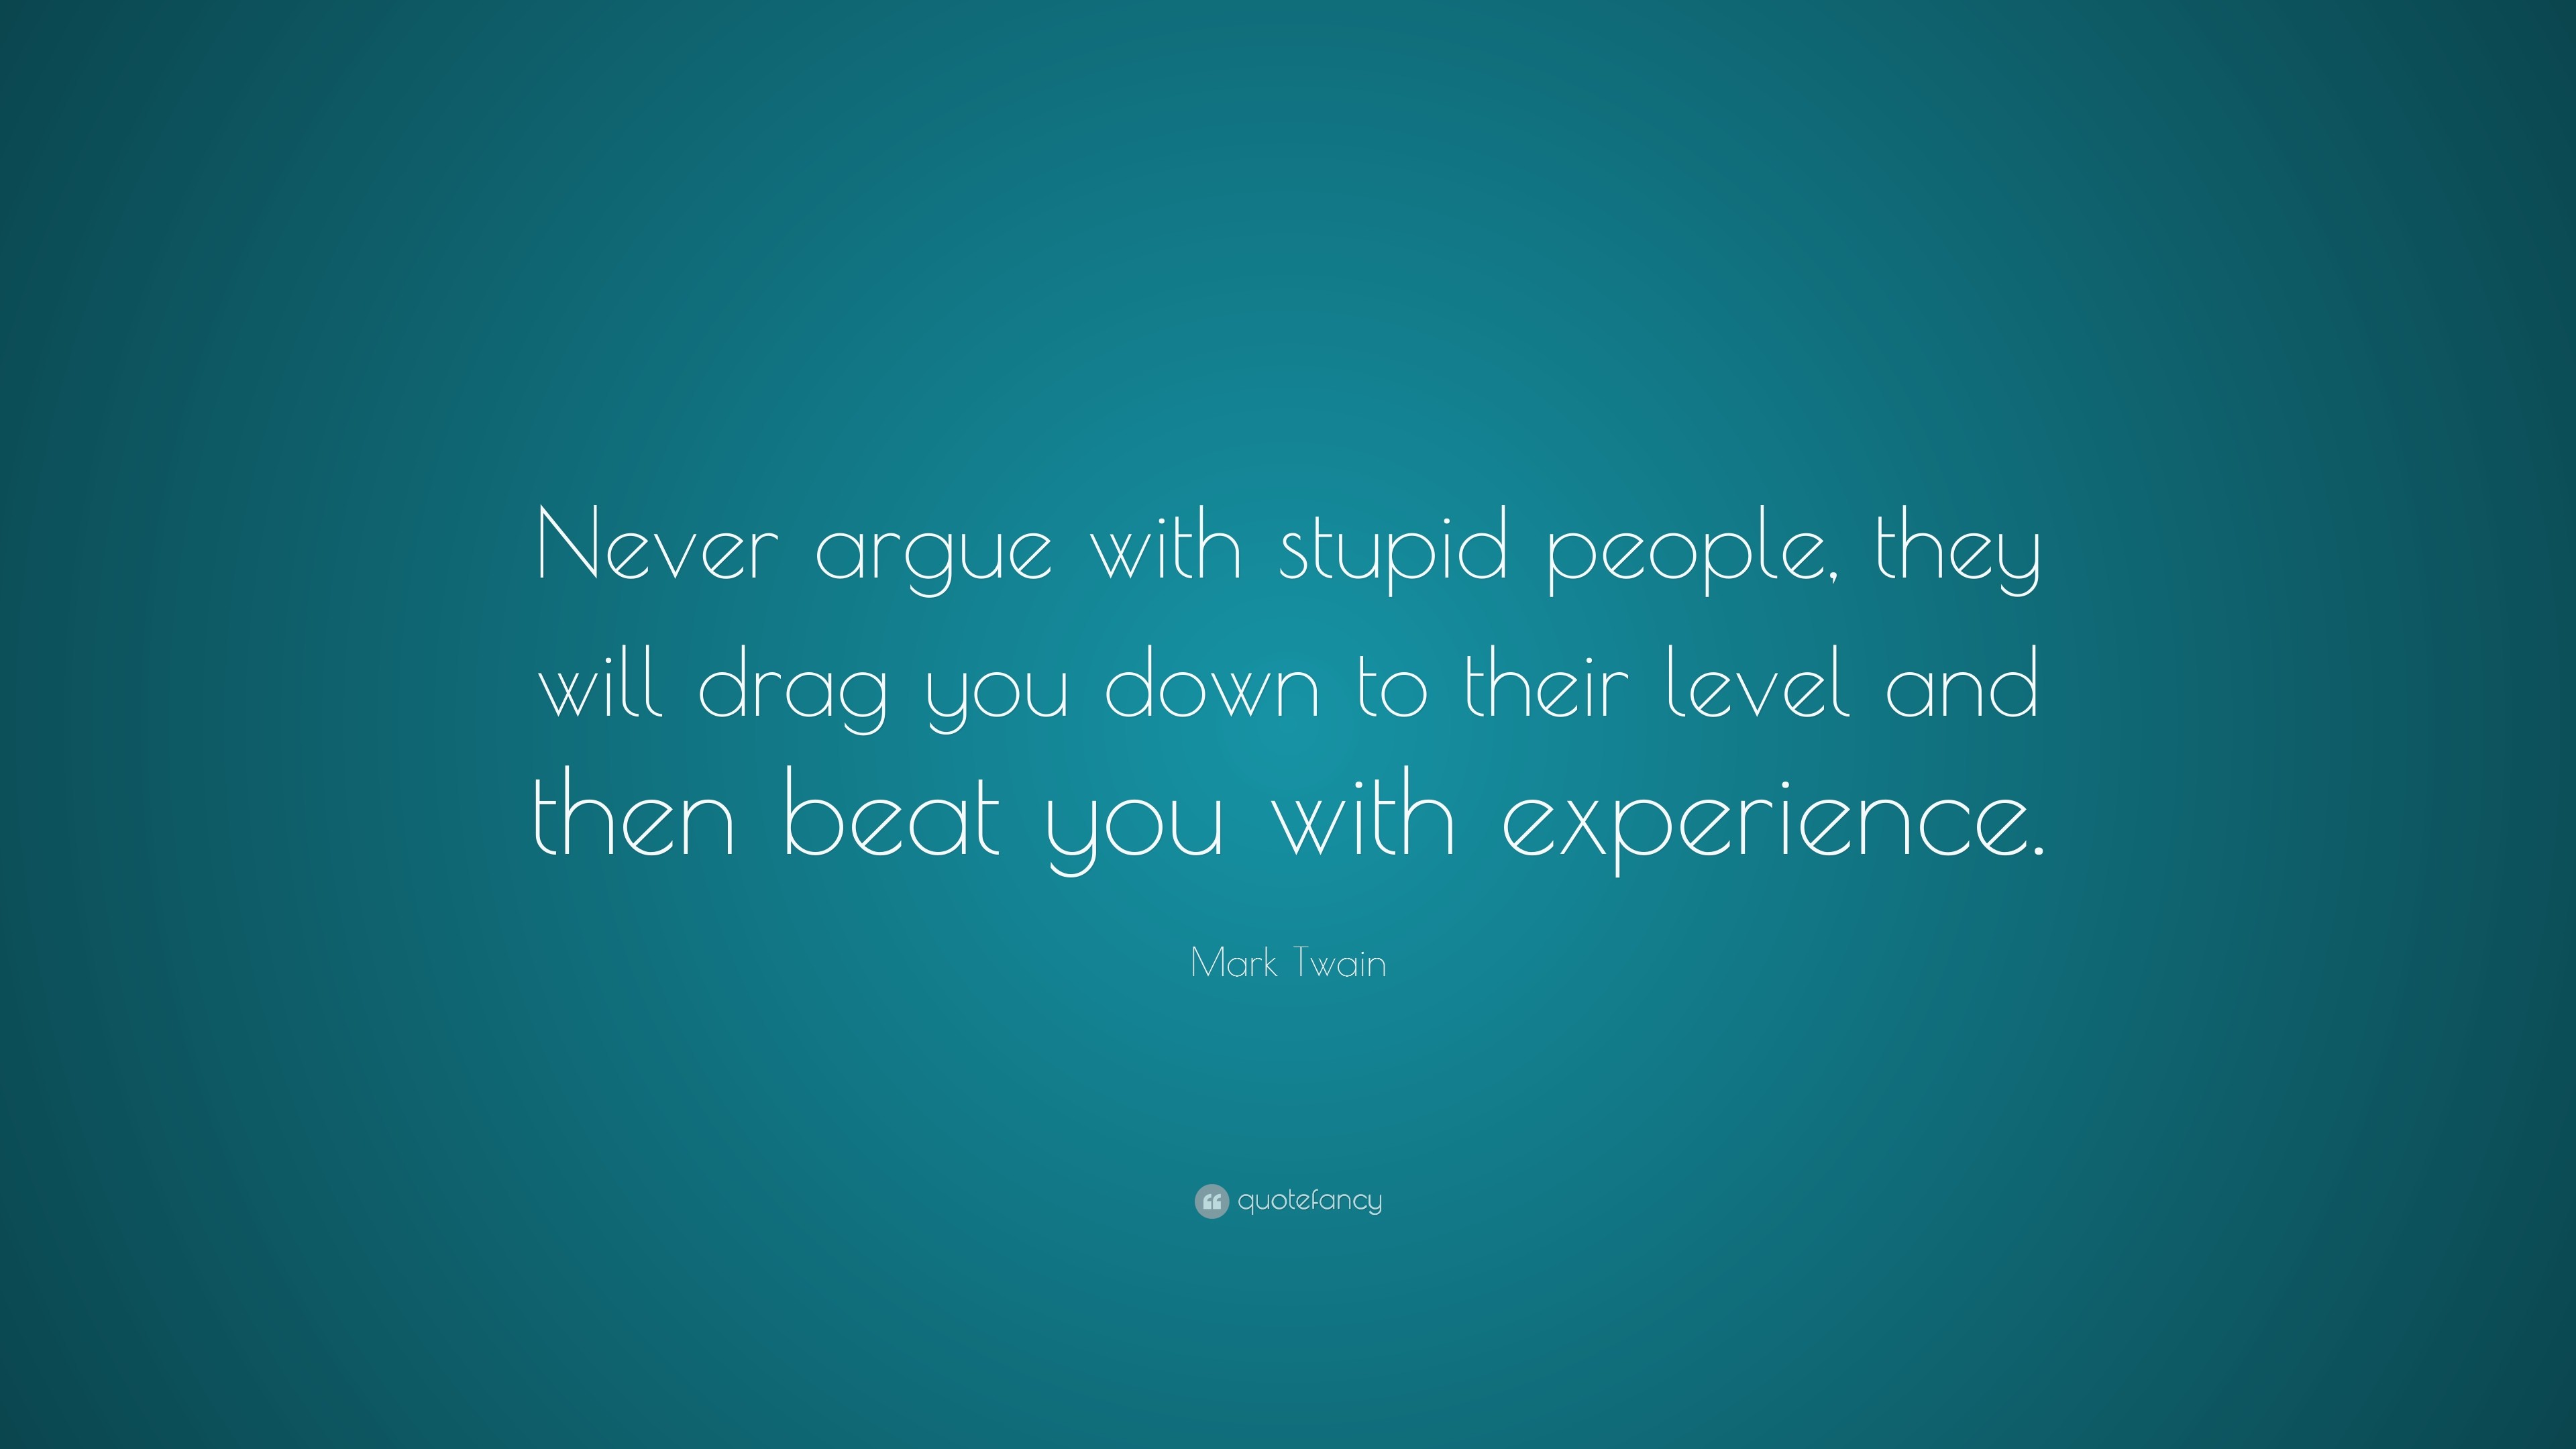 3840x2160 Mark Twain Quote: “Never argue with stupid people, they will drag you down